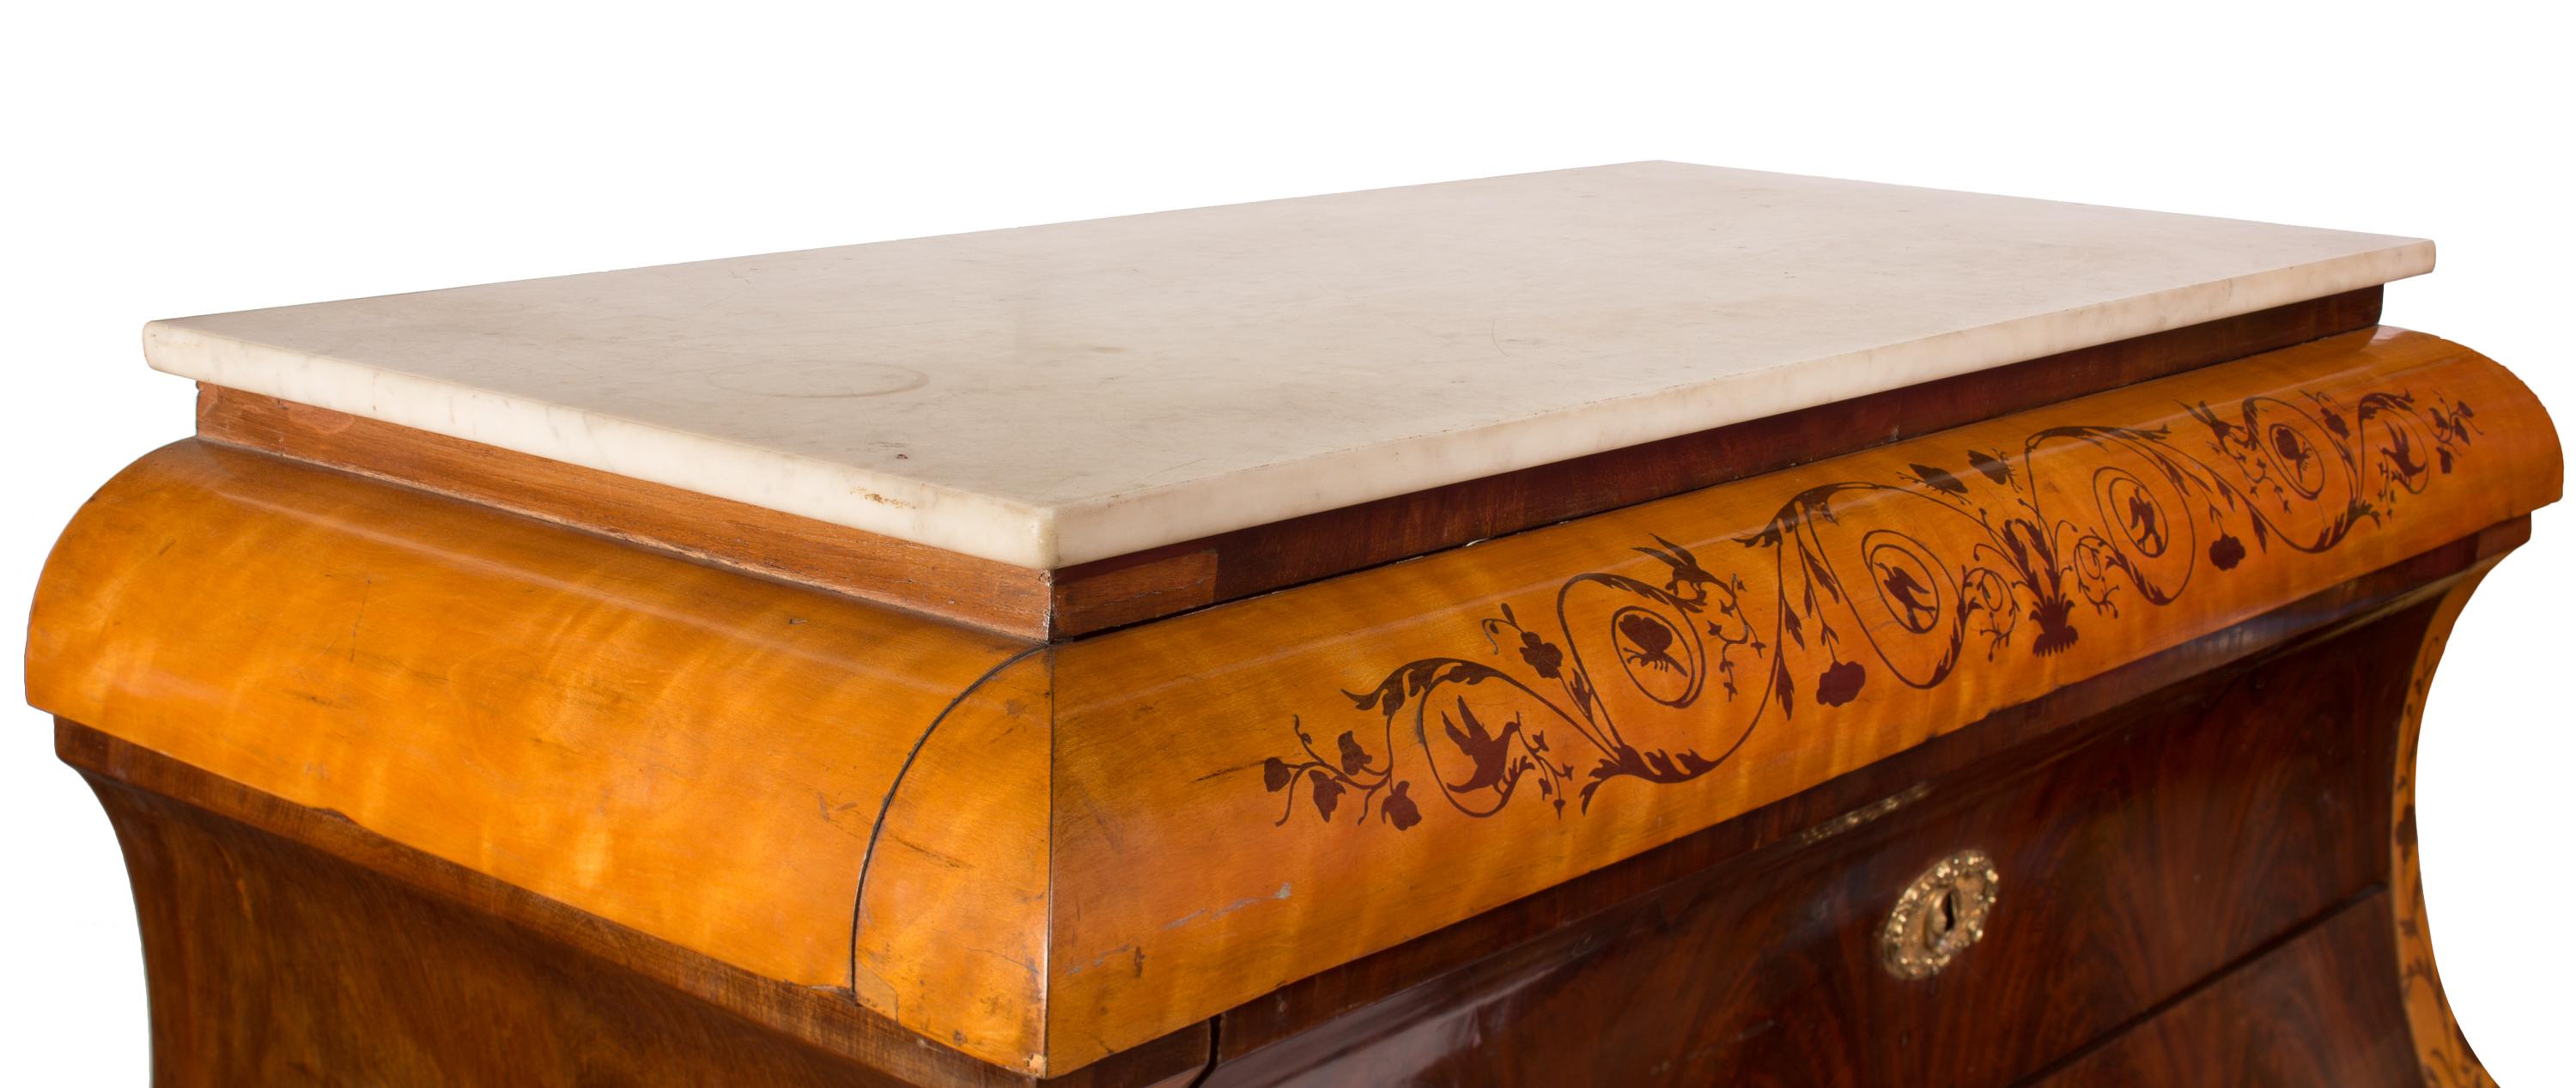 Hardwood 19th Century Spanish Regency / Isabelina Mallorquín Commode, Marquetry Inlay For Sale